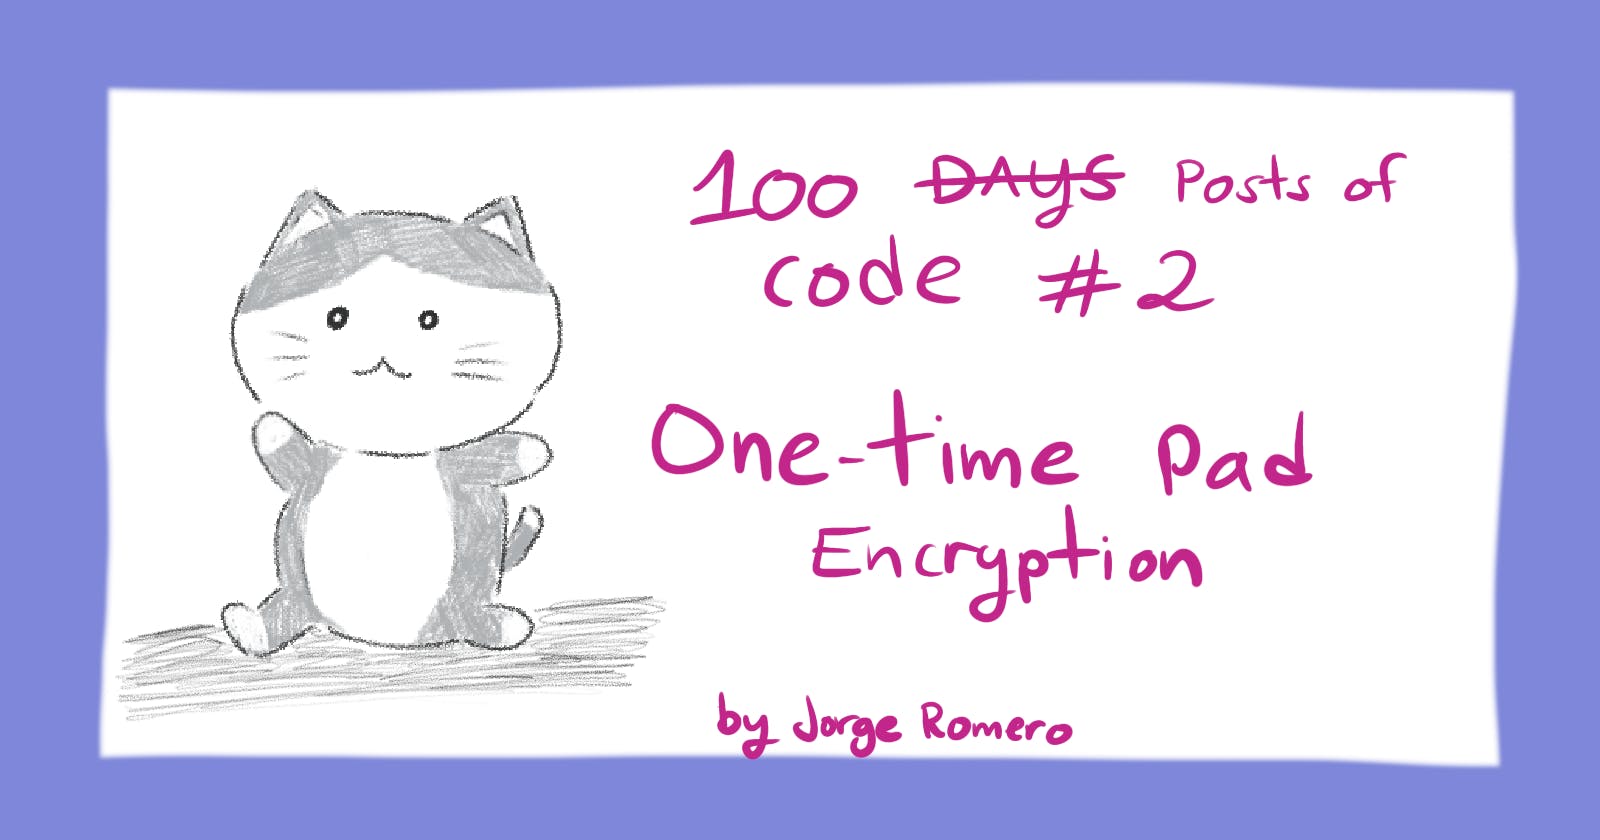 100 post of code #2: One-time pad encryption